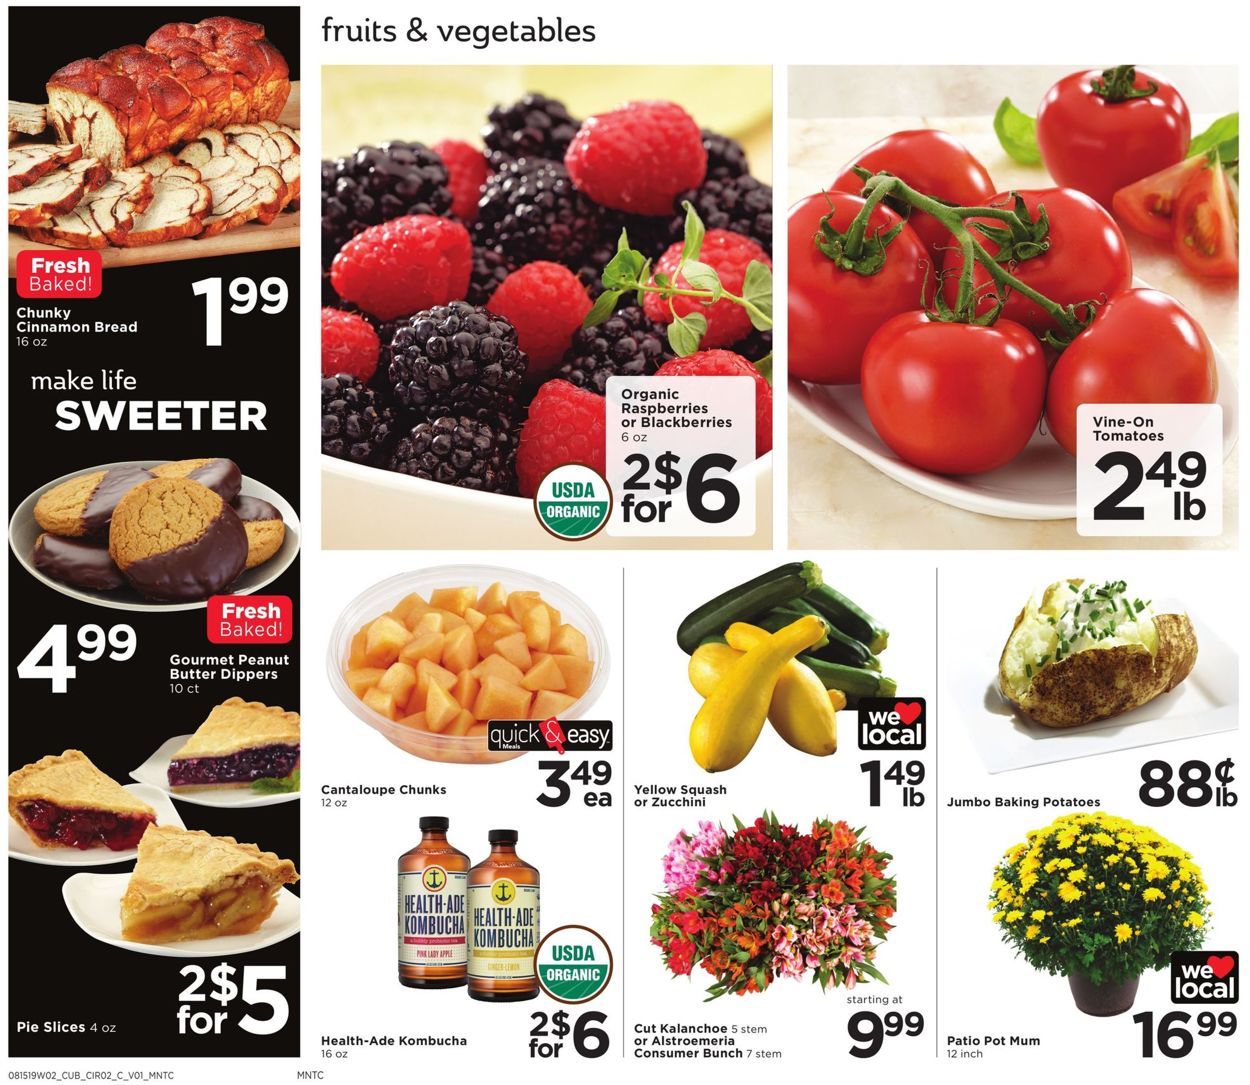 Catalogue Cub Foods from 08/15/2019